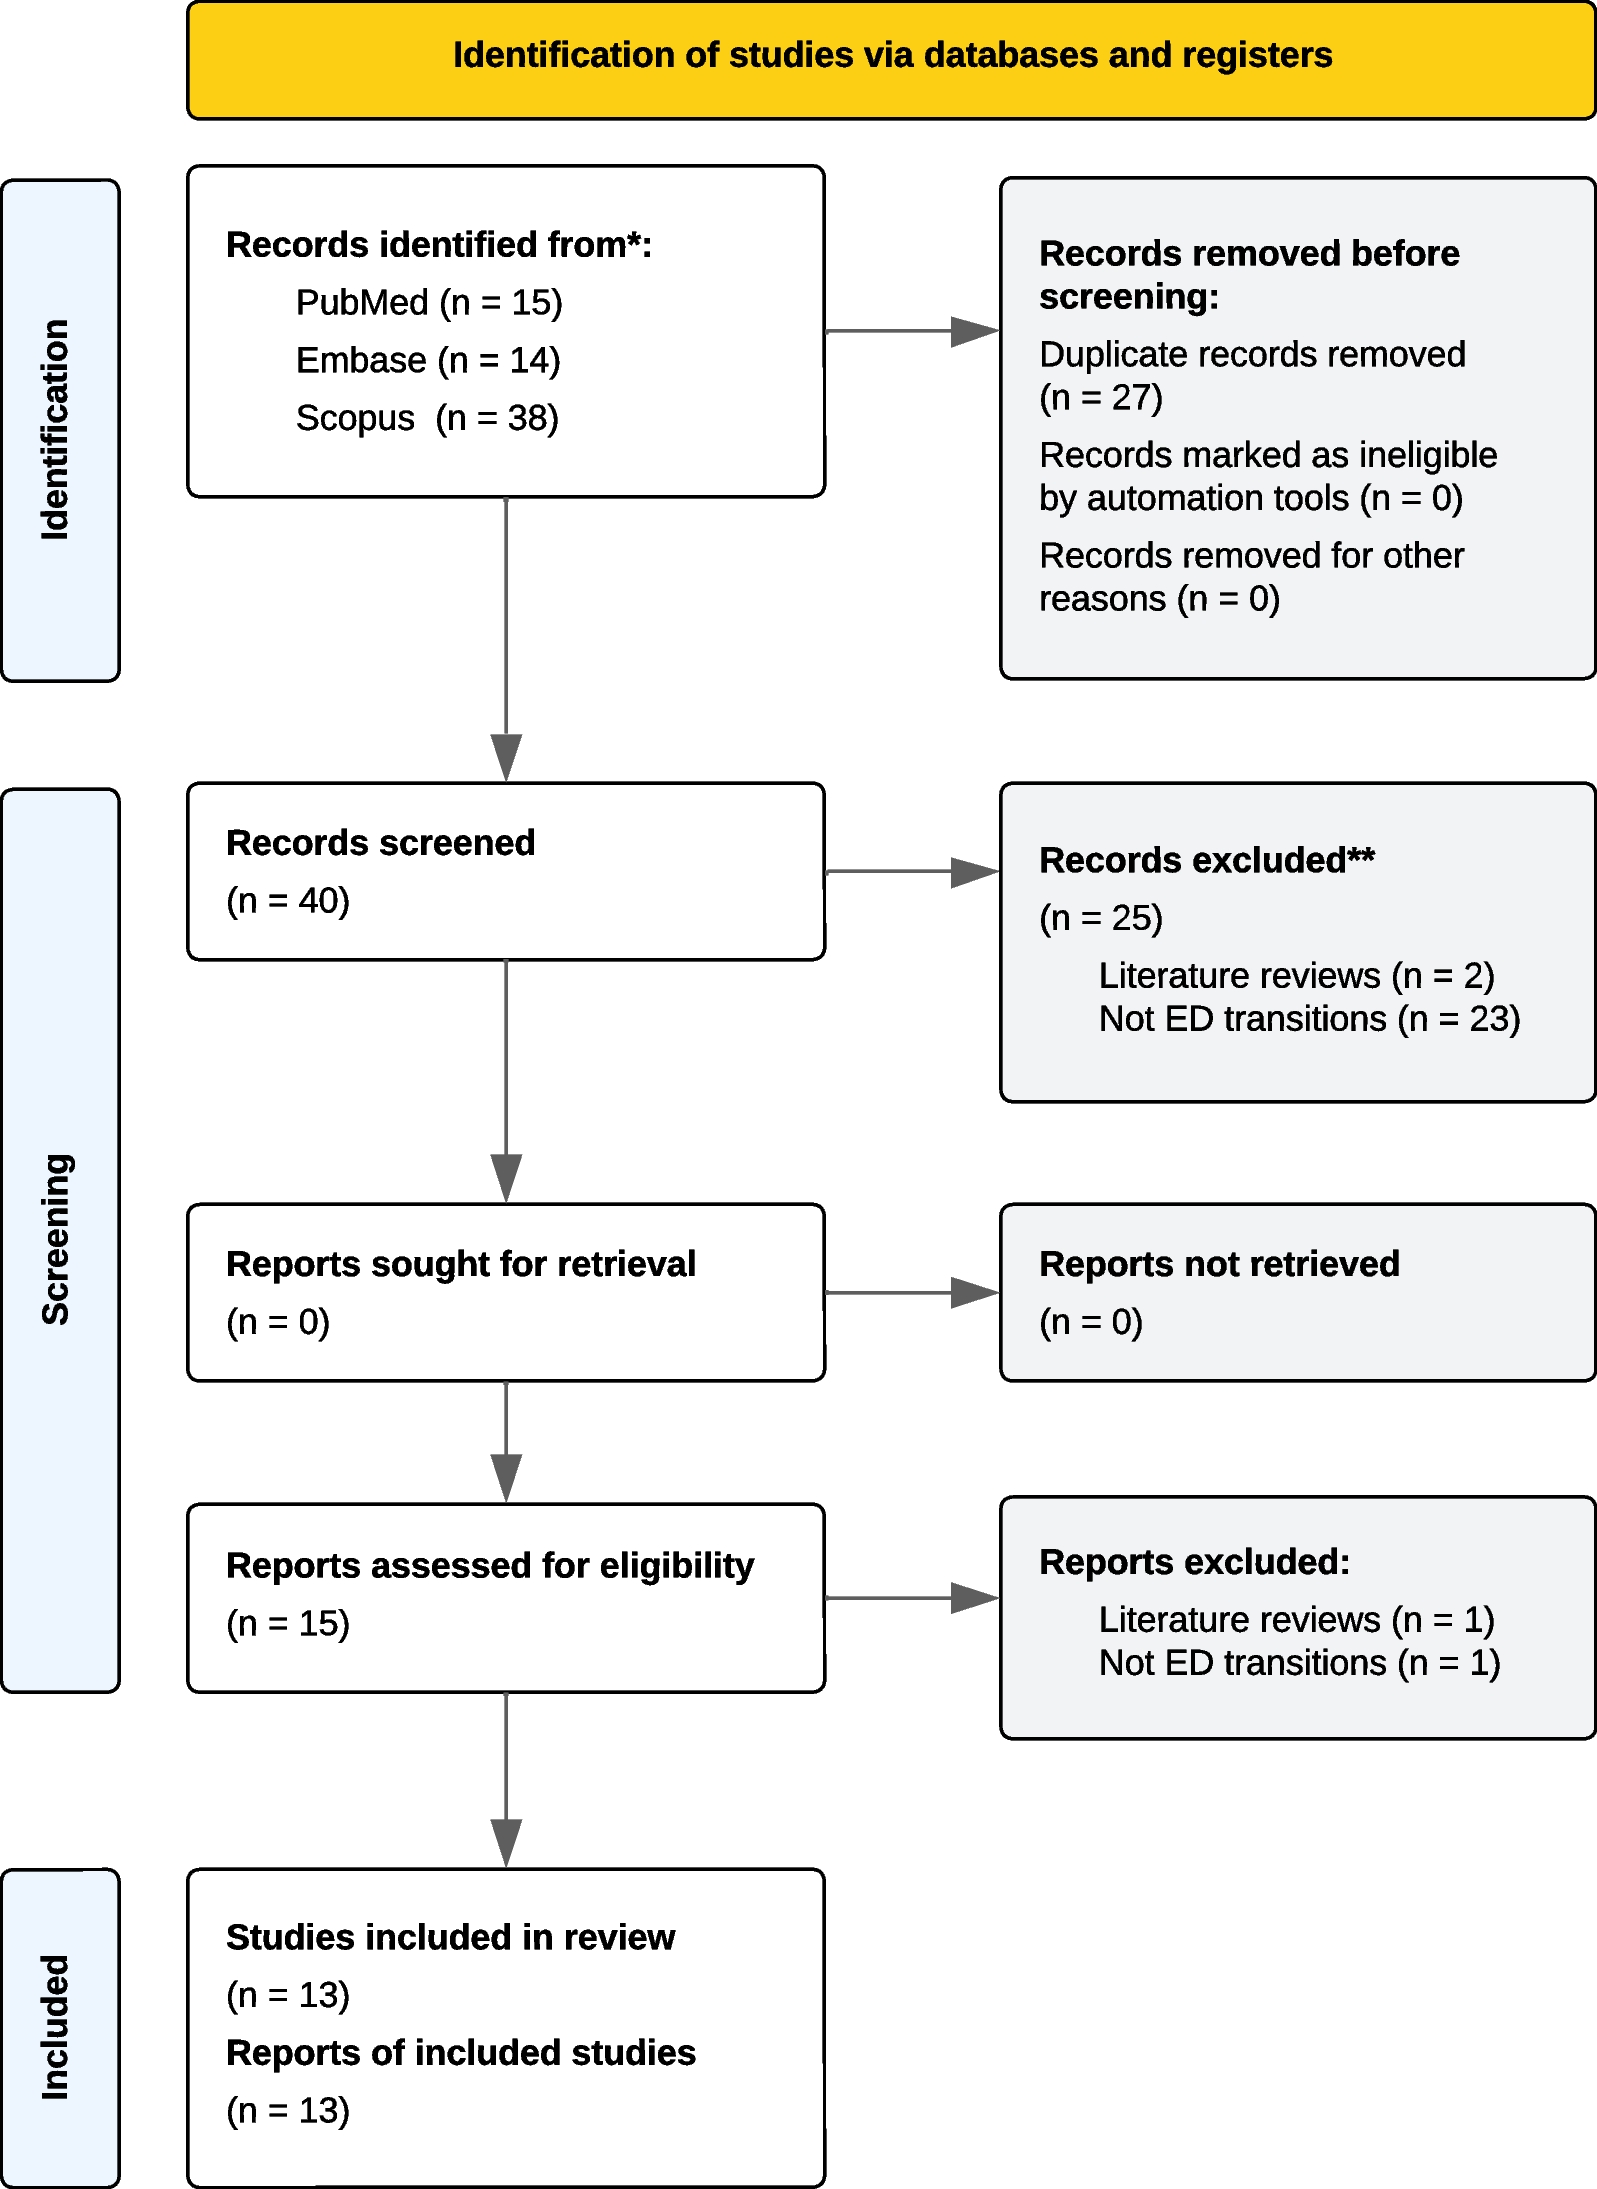 Transitions from child and adolescent to adult mental health services for eating disorders: an in-depth systematic review and development of a transition framework